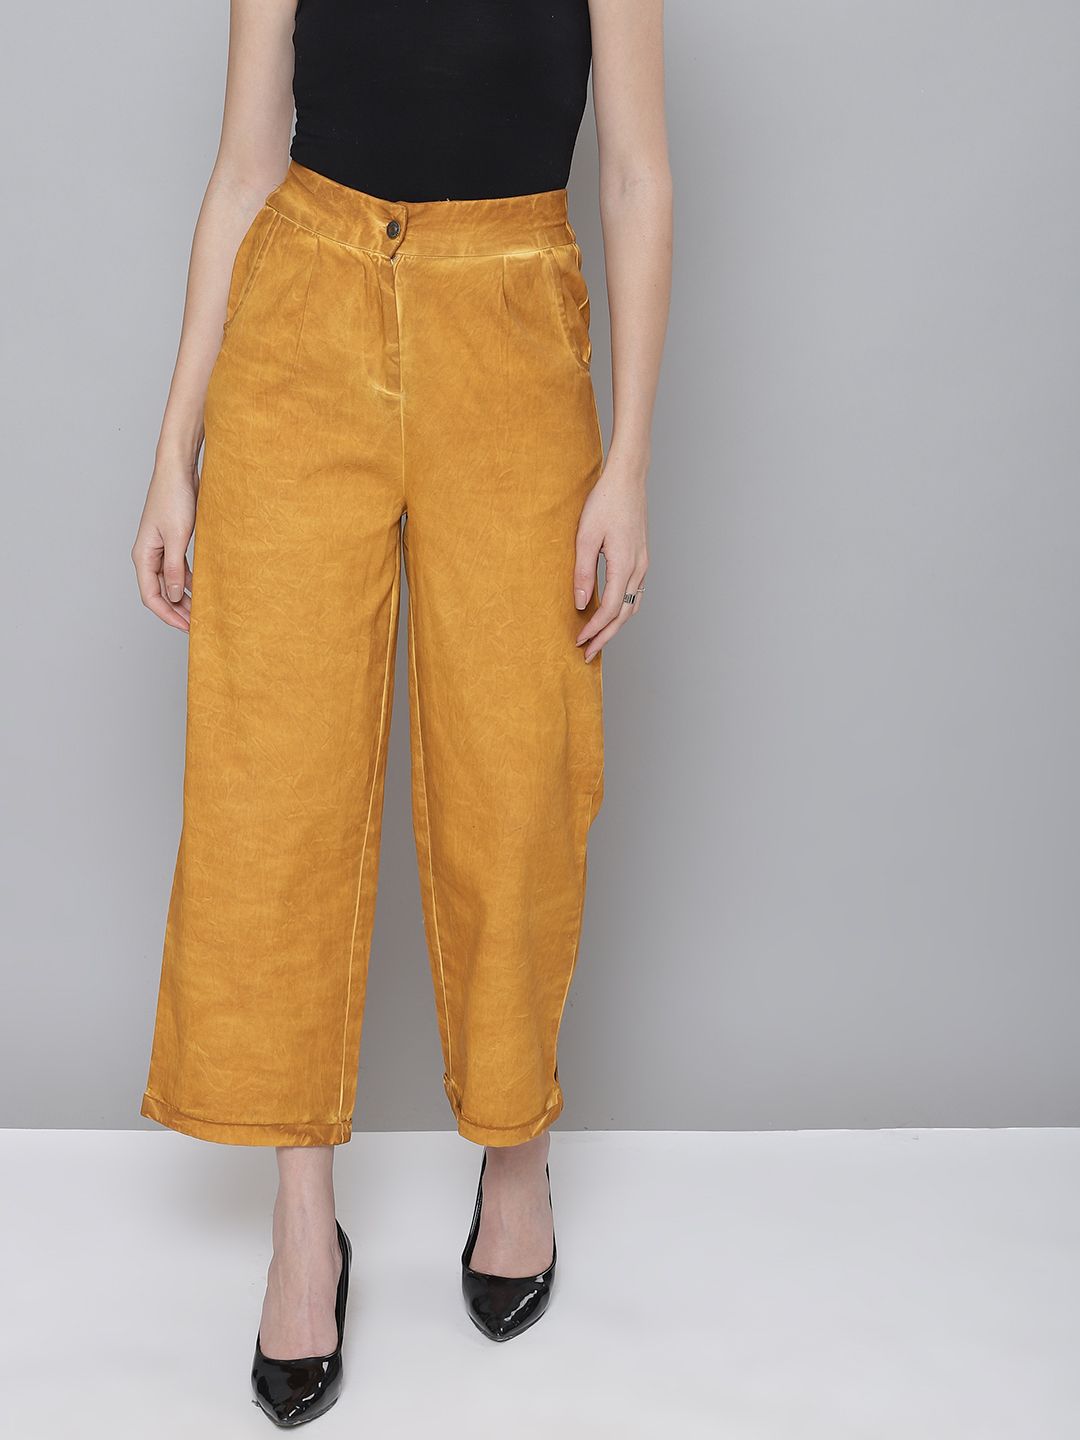 SASSAFRAS Women Mustard Yellow Twill Cotton Faded Culottes Trousers Price  in India, Full Specifications & Offers